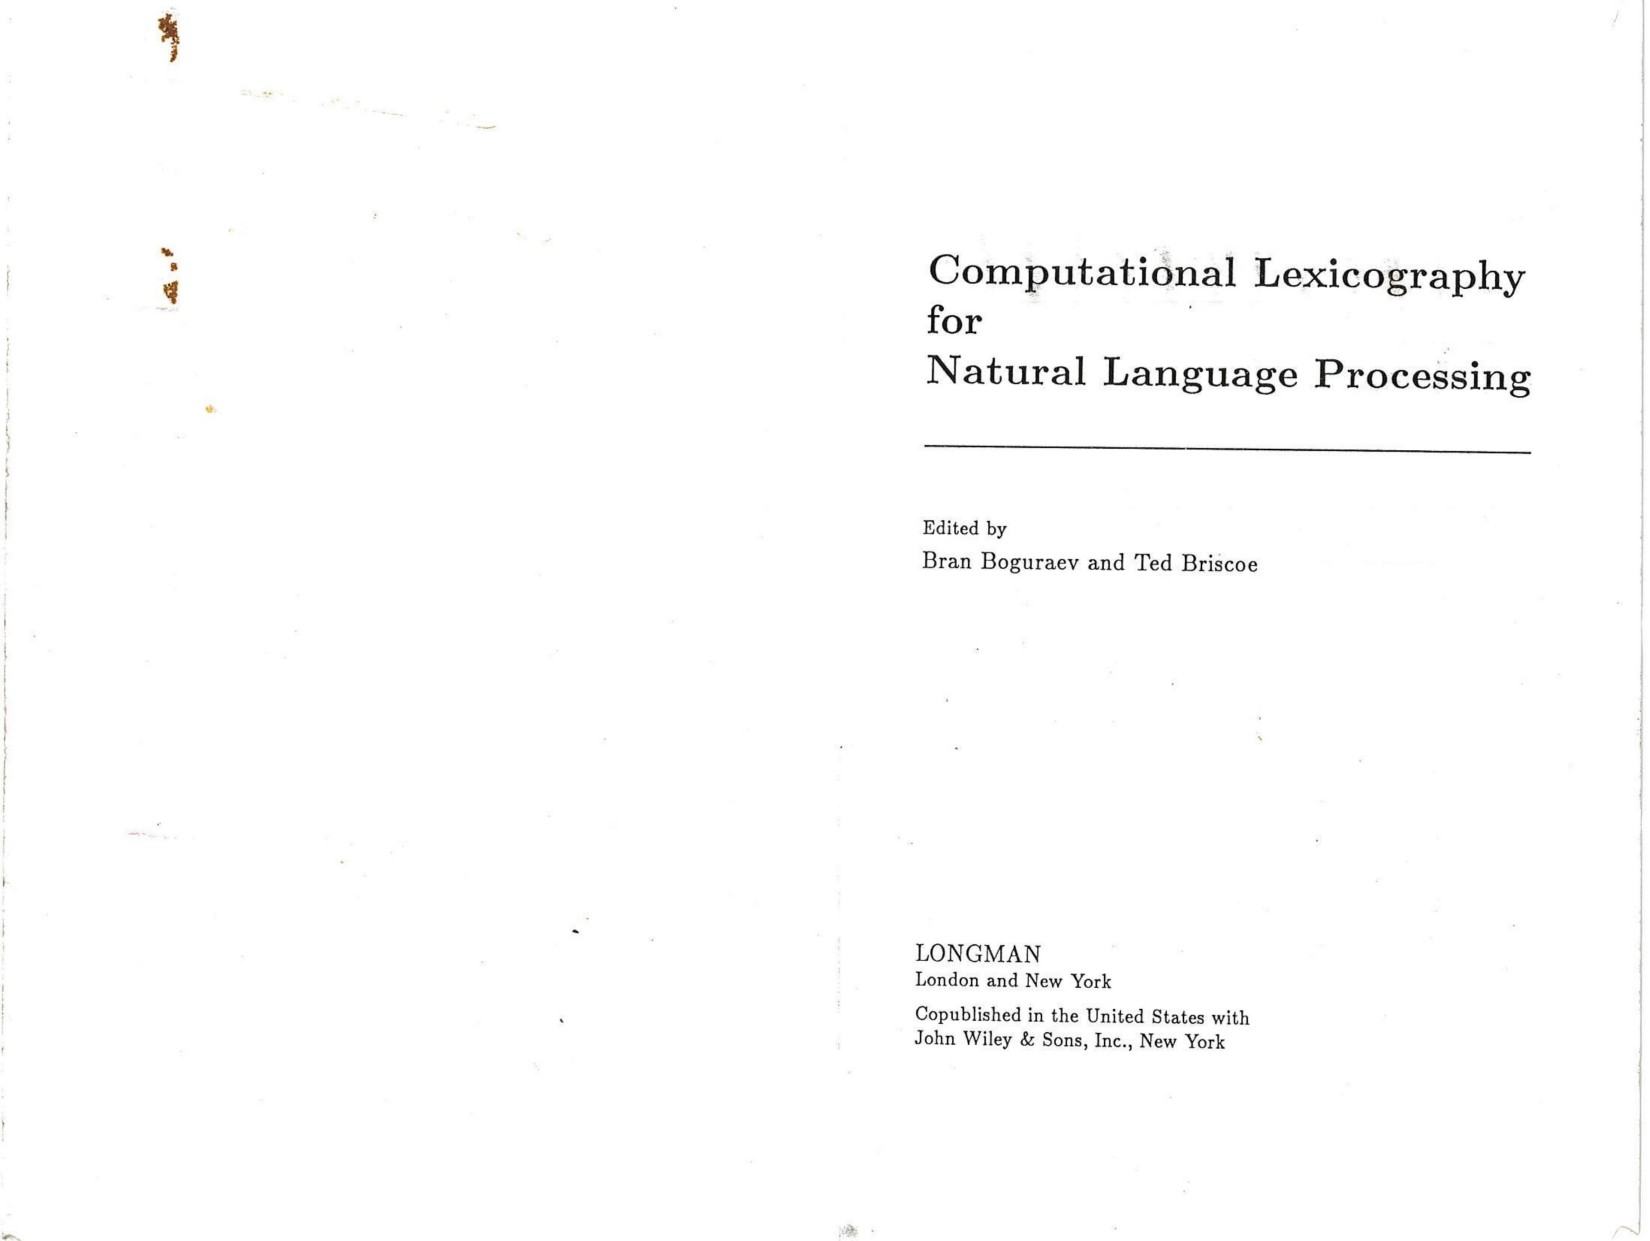 Computational Lexicography for Natural Language Processing